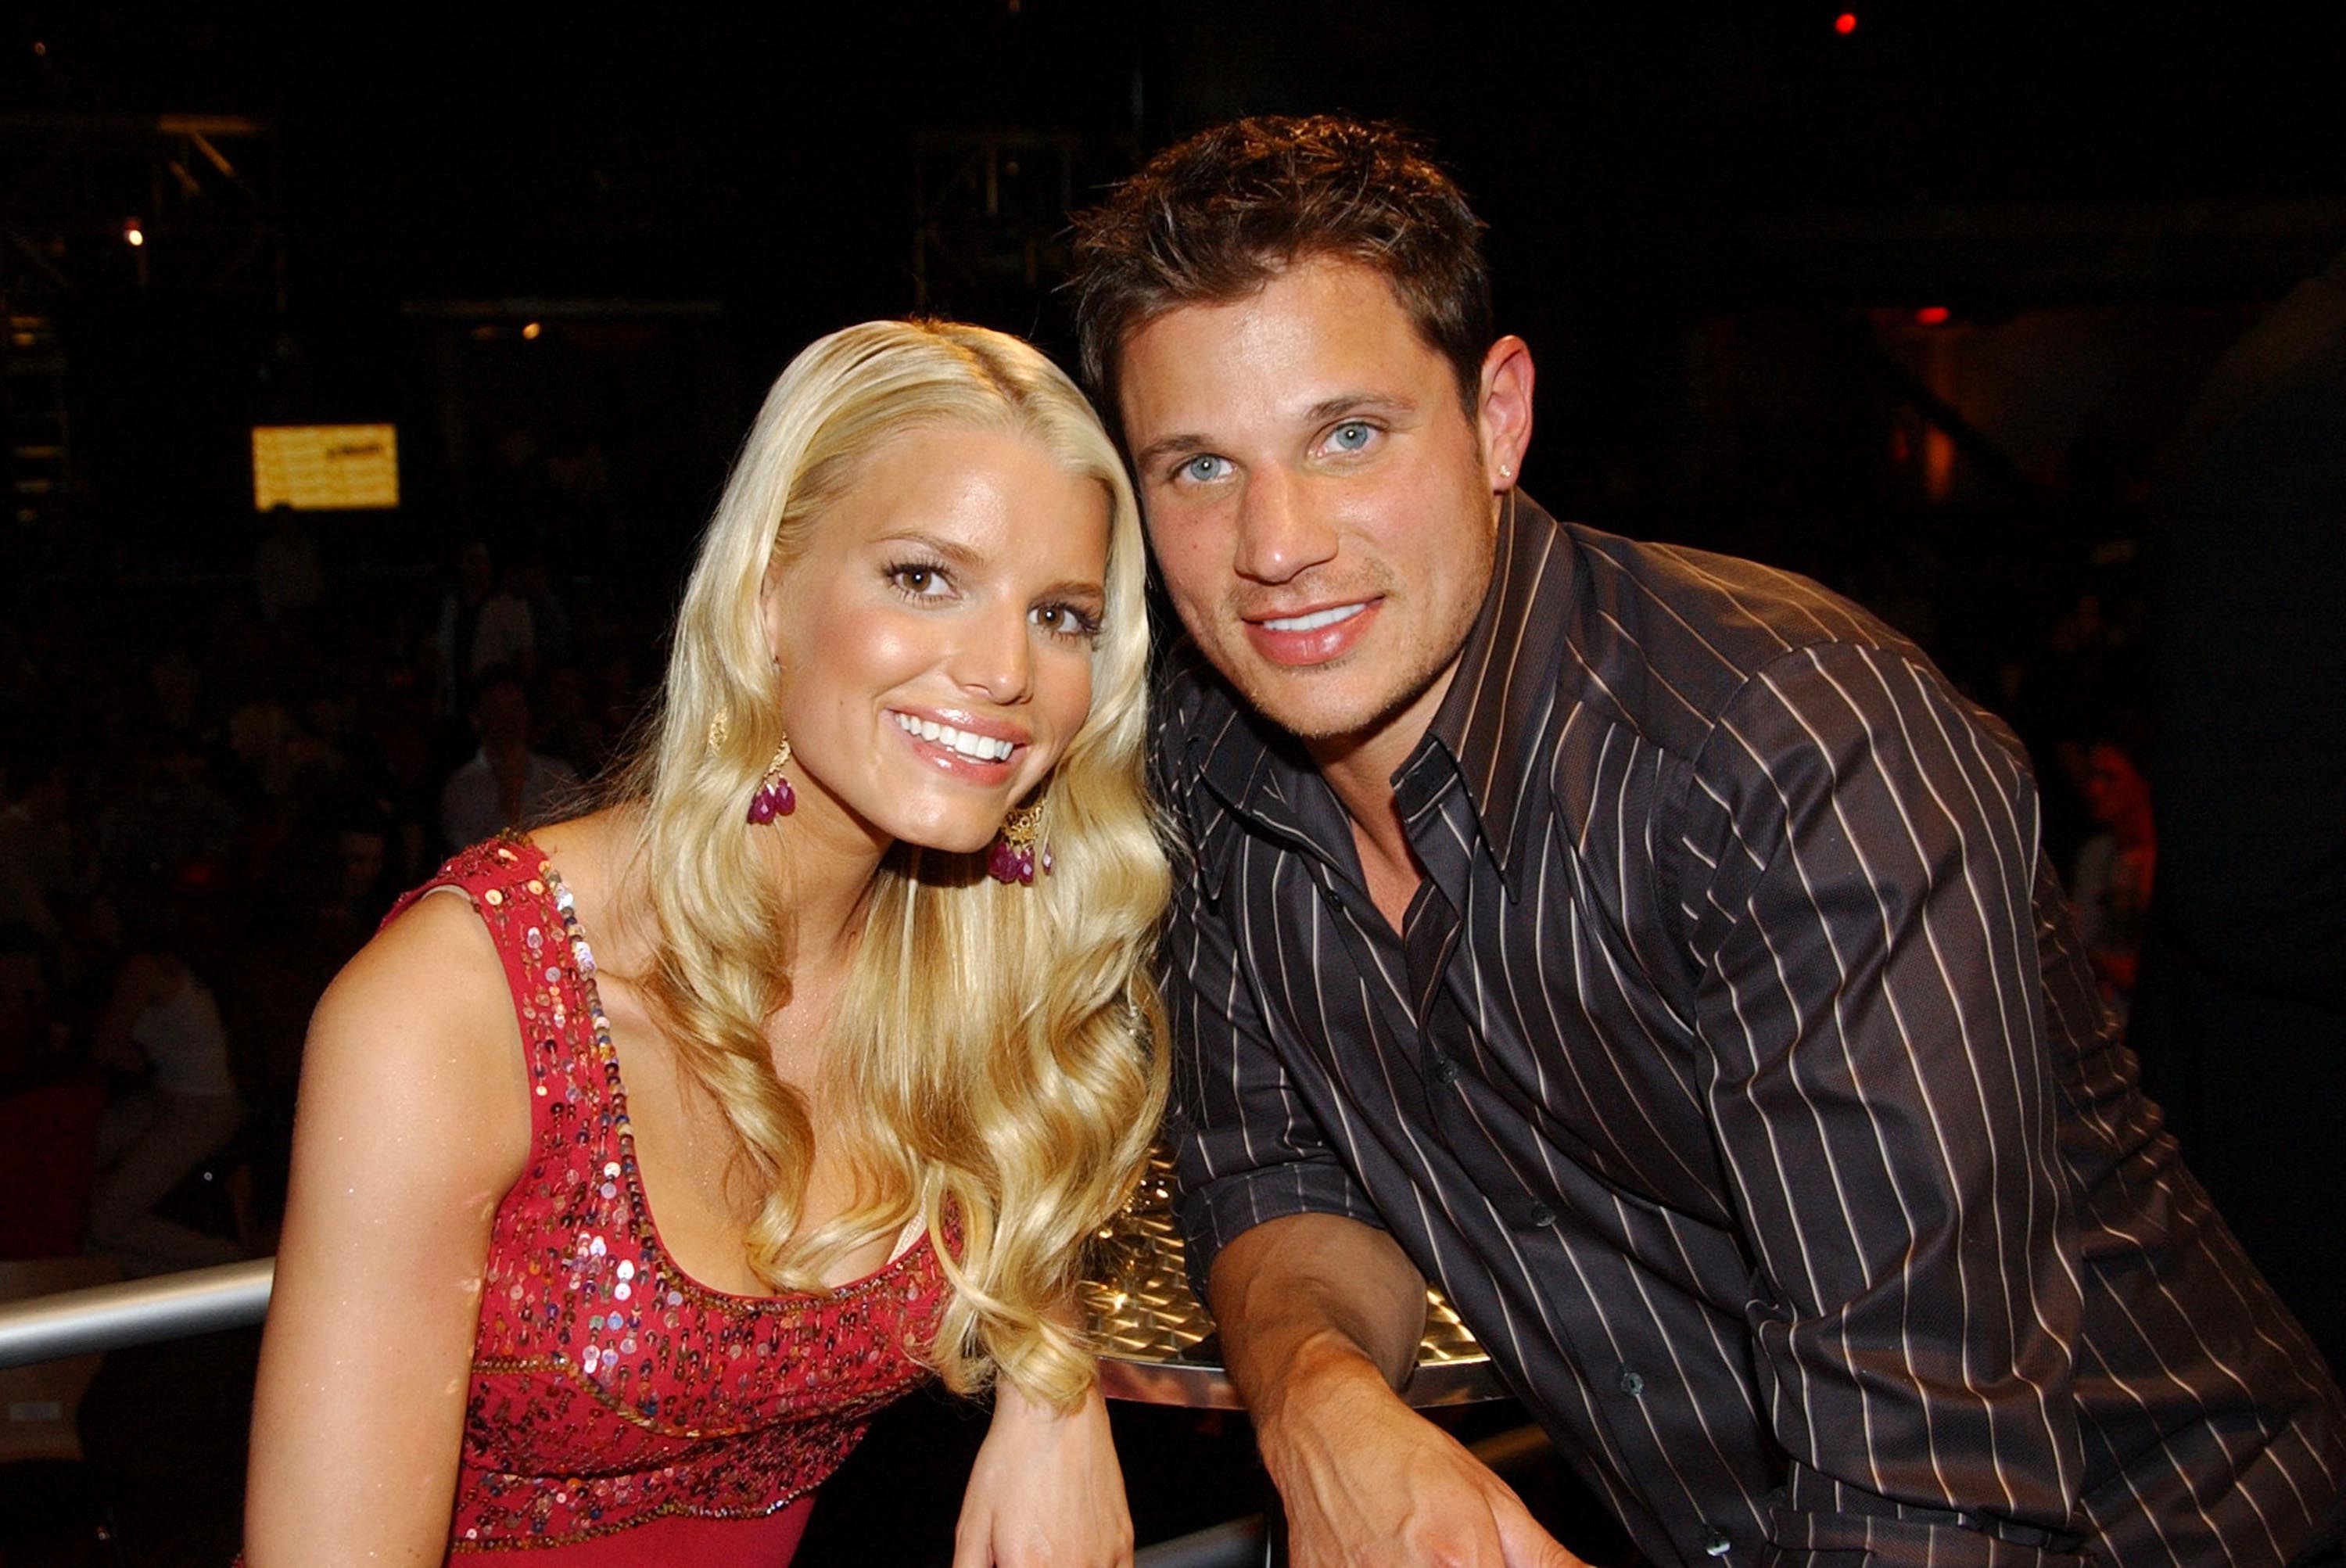 Jessica Simpson and Nick Lachey smiling for photo backstage at an MTV party